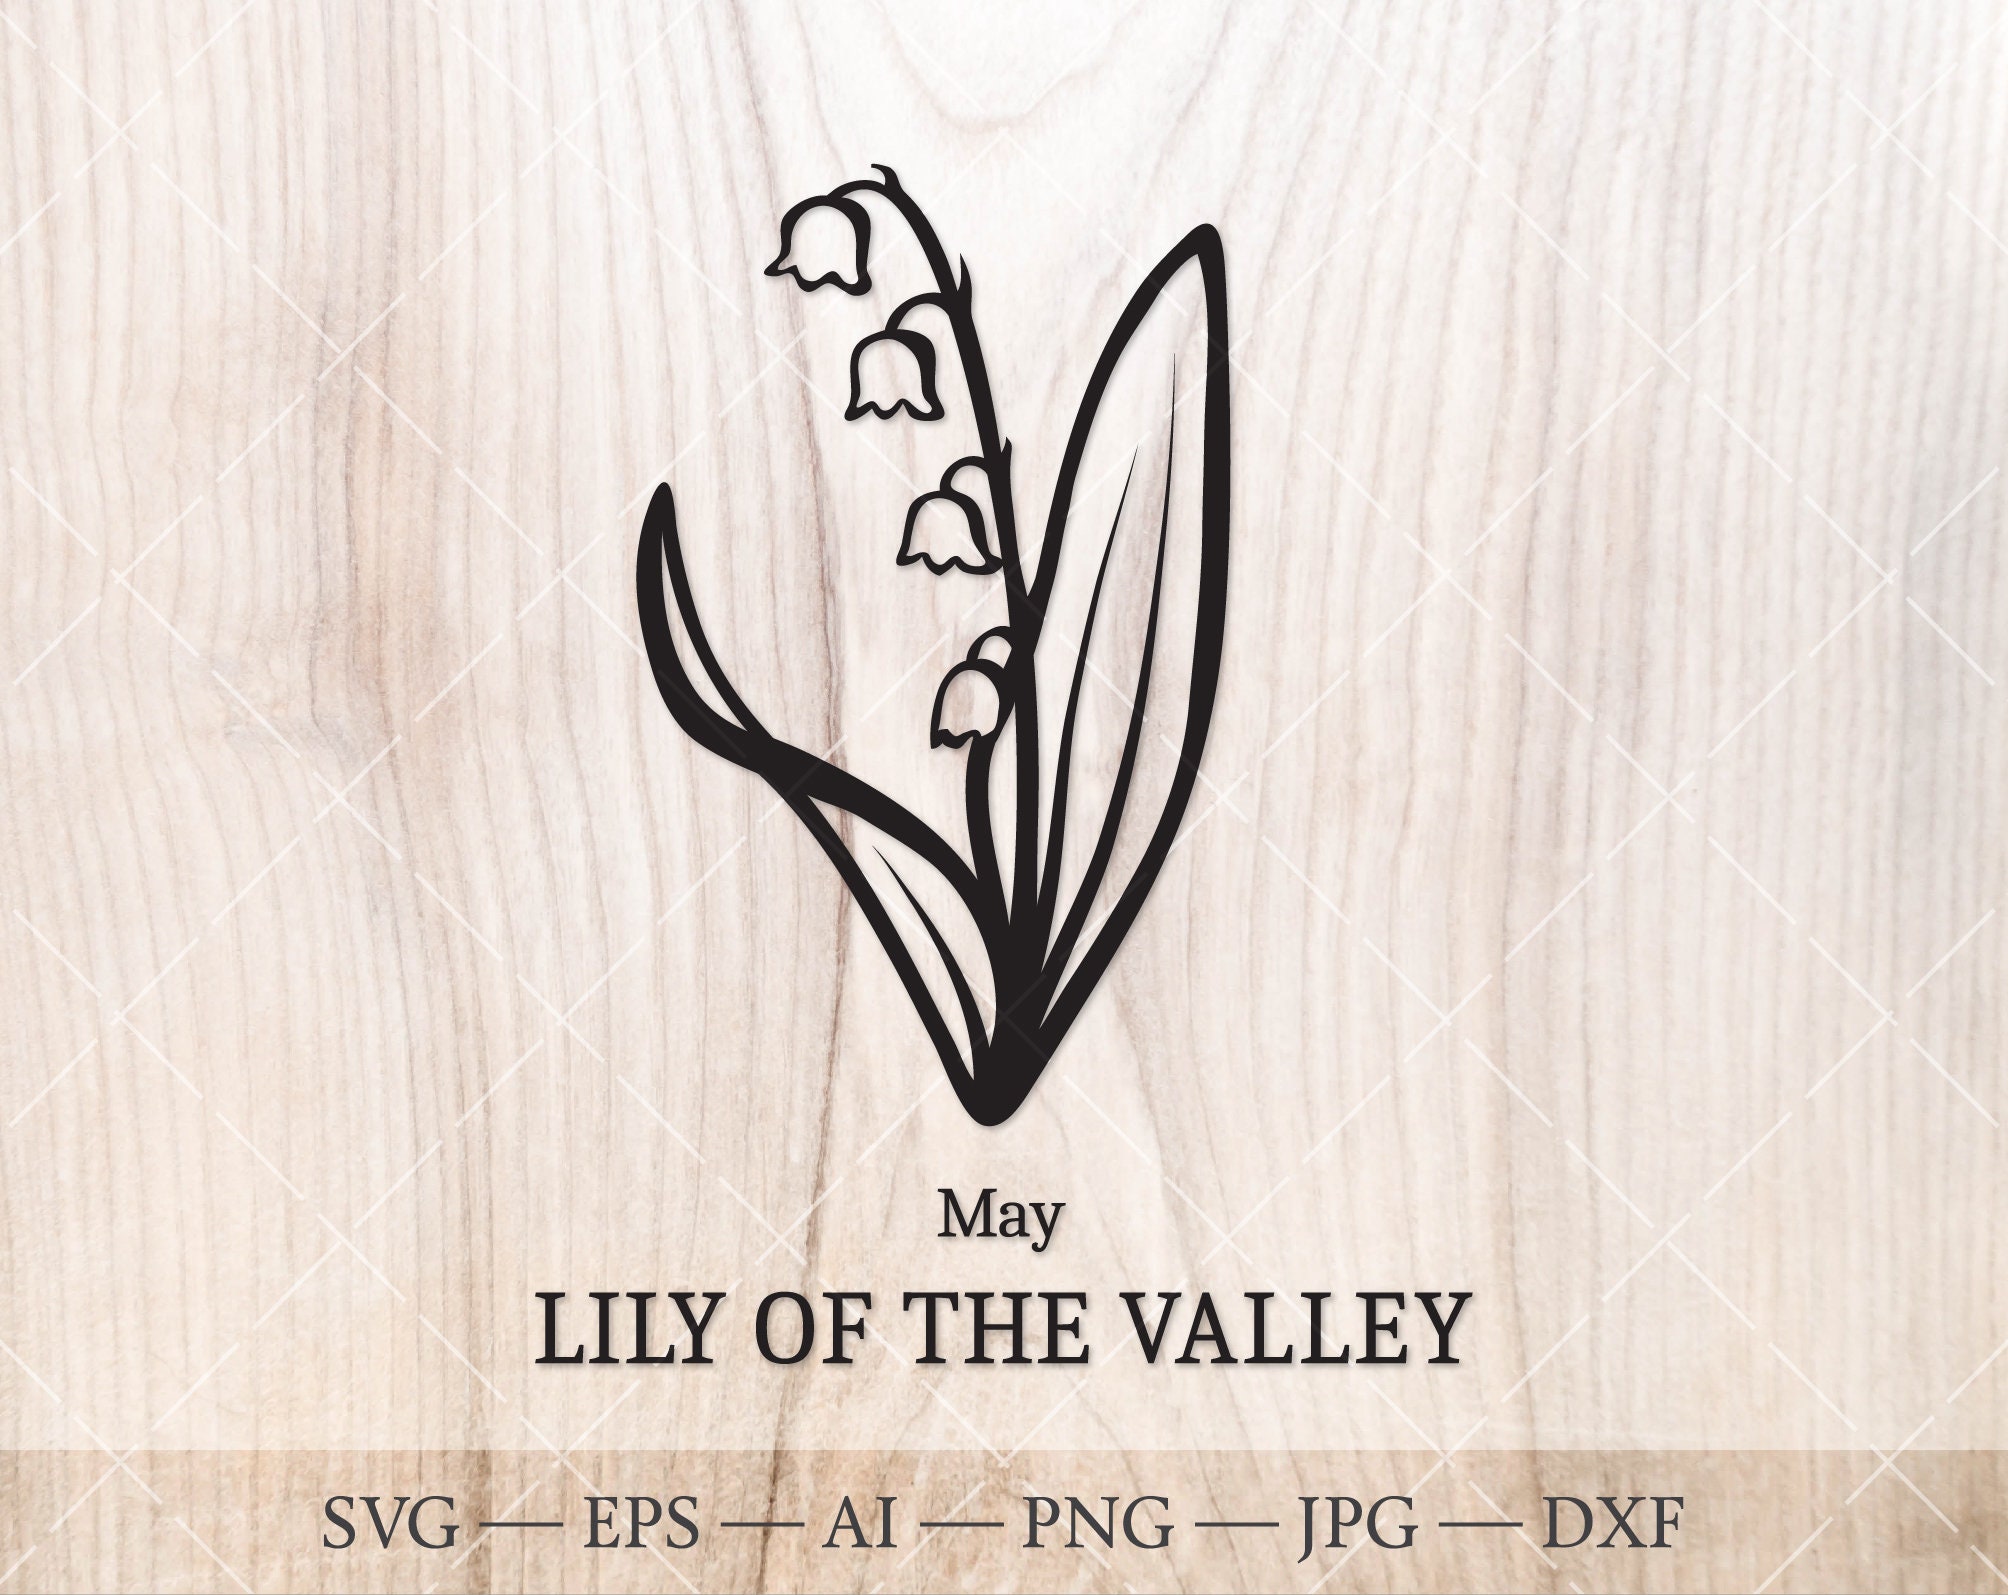 Birth flower of the month: lily of the valley